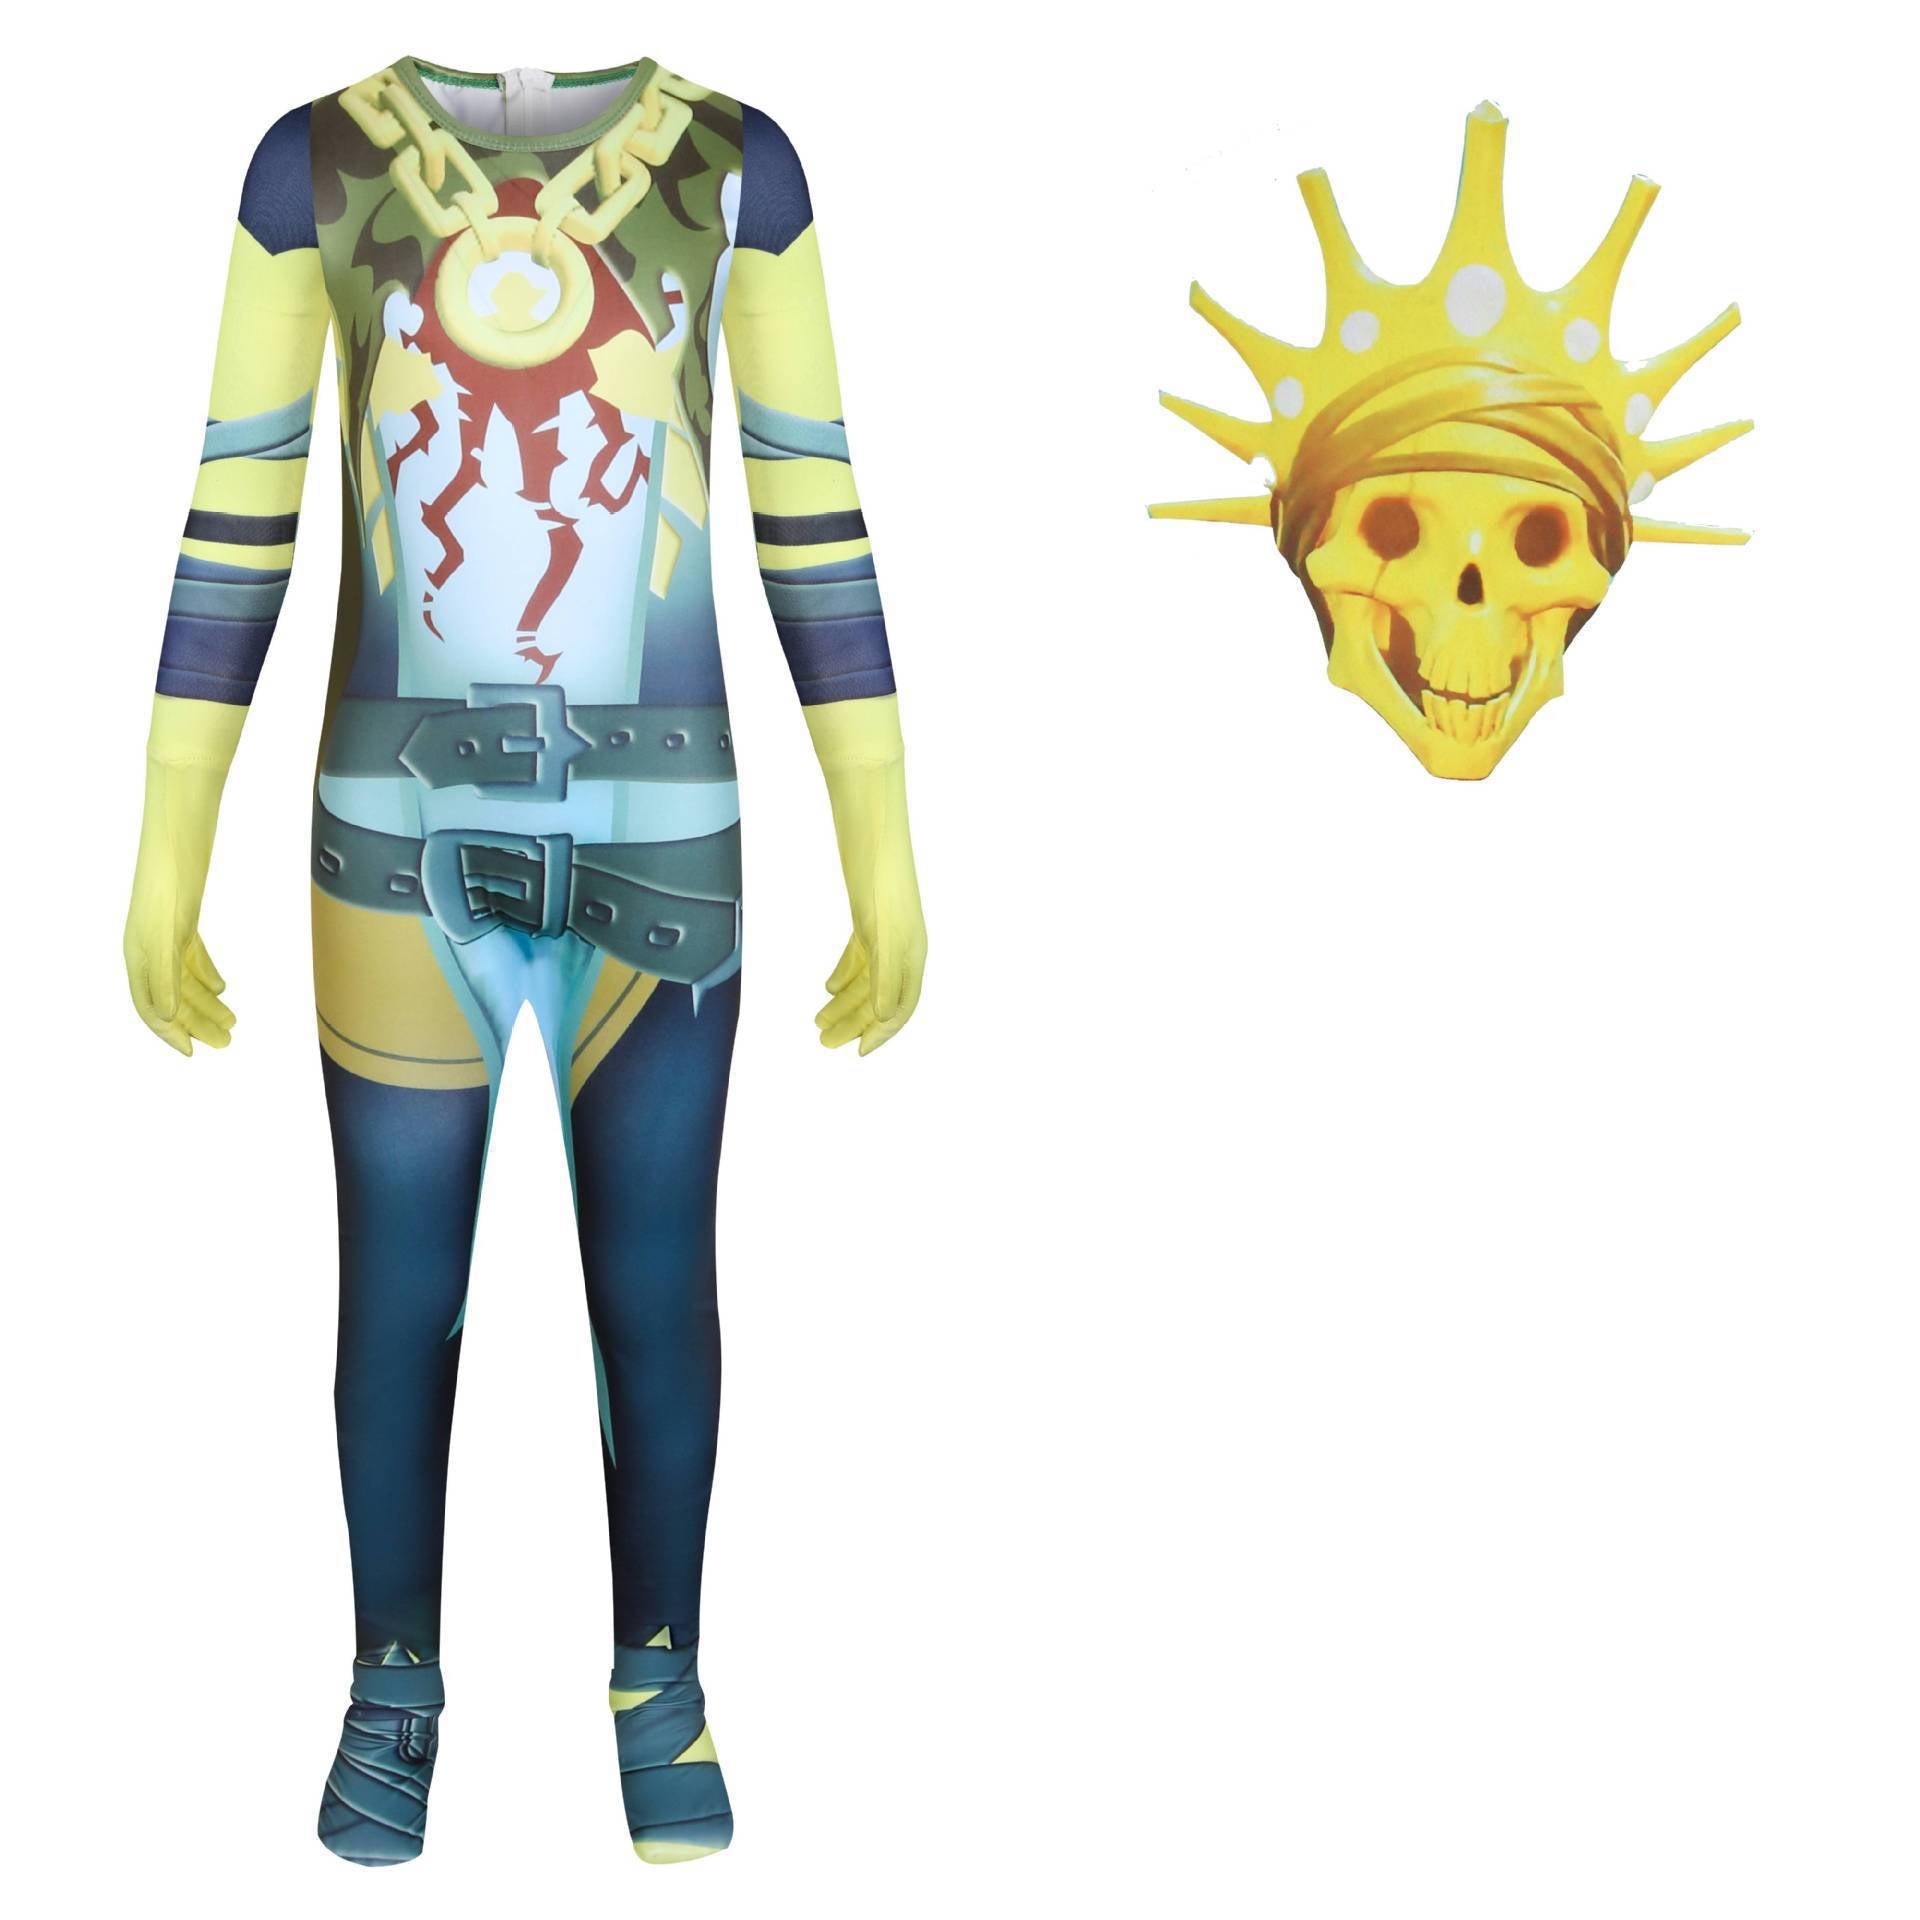 Fortnite Oro Costume Jumpsuit Suit Halloween Supplies For Kids Uncostume - yellow suit yellow suit yellow suit roblox